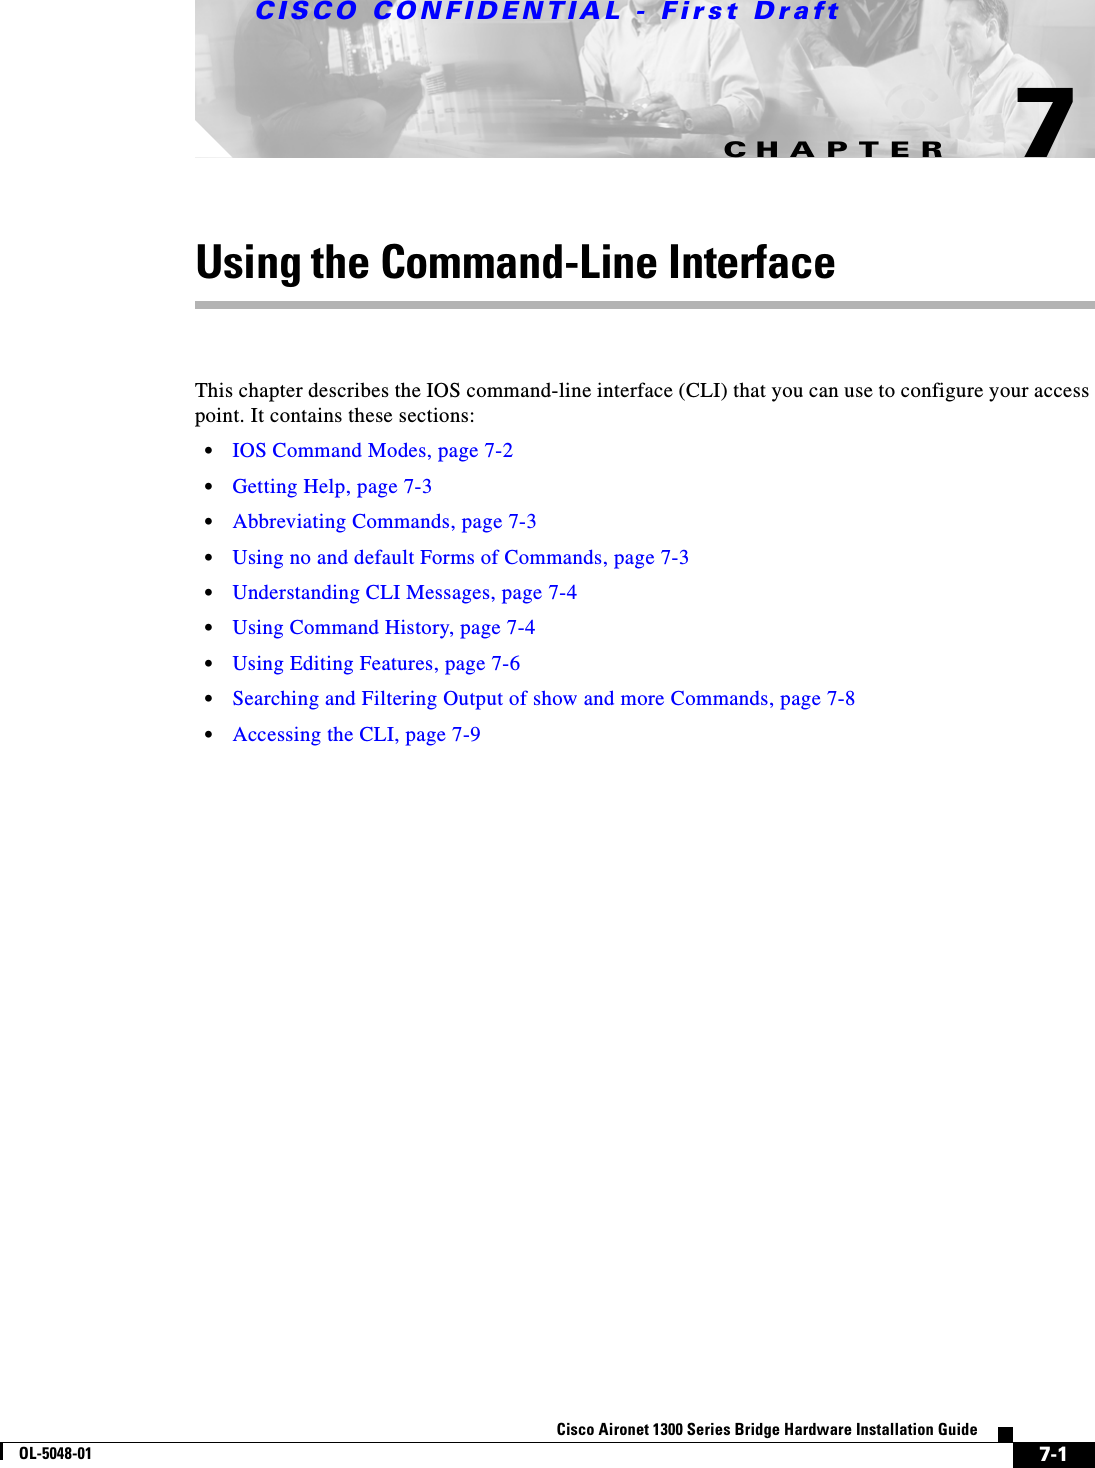 CHAPTERCISCO CONFIDENTIAL - First Draft7-1Cisco Aironet 1300 Series Bridge Hardware Installation GuideOL-5048-017Using the Command-Line InterfaceThis chapter describes the IOS command-line interface (CLI) that you can use to configure your access point. It contains these sections:•IOS Command Modes, page 7-2•Getting Help, page 7-3•Abbreviating Commands, page 7-3•Using no and default Forms of Commands, page 7-3•Understanding CLI Messages, page 7-4•Using Command History, page 7-4•Using Editing Features, page 7-6•Searching and Filtering Output of show and more Commands, page 7-8•Accessing the CLI, page 7-9